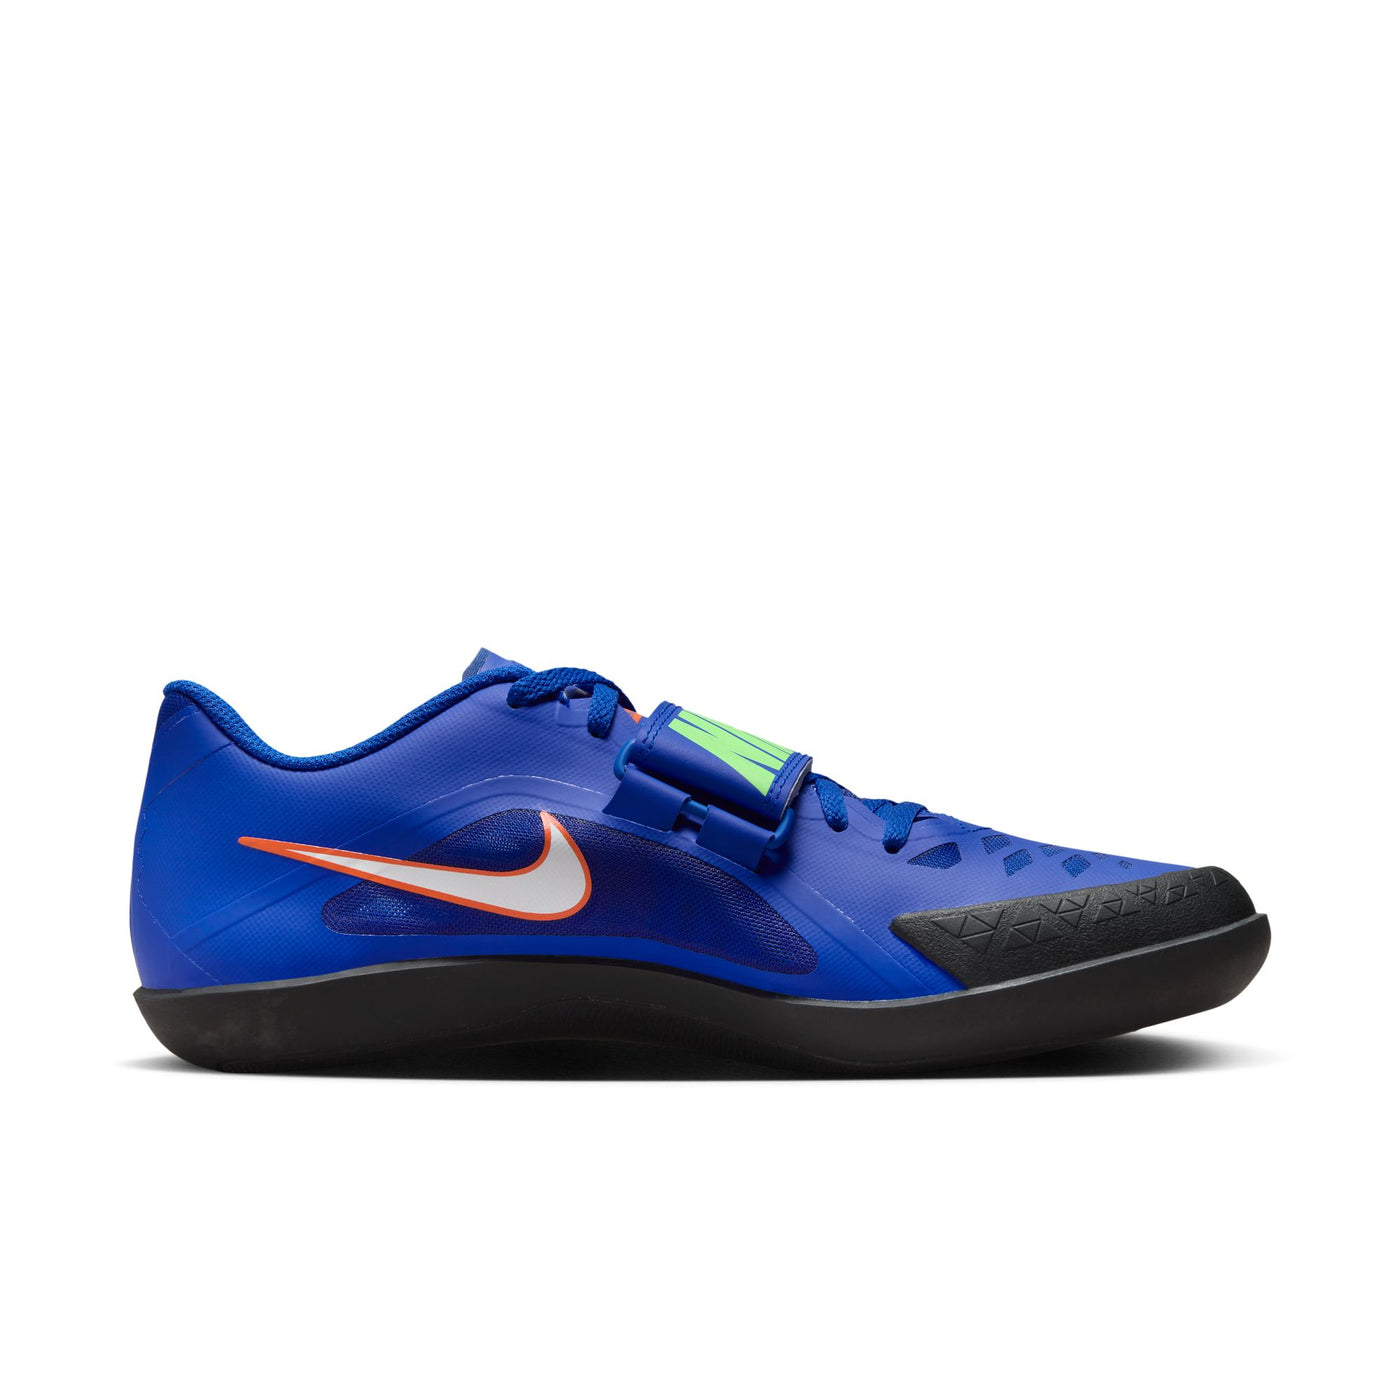 Unisex Nike Zoom Rival SD 2 Throwing Shoe - 685134-400